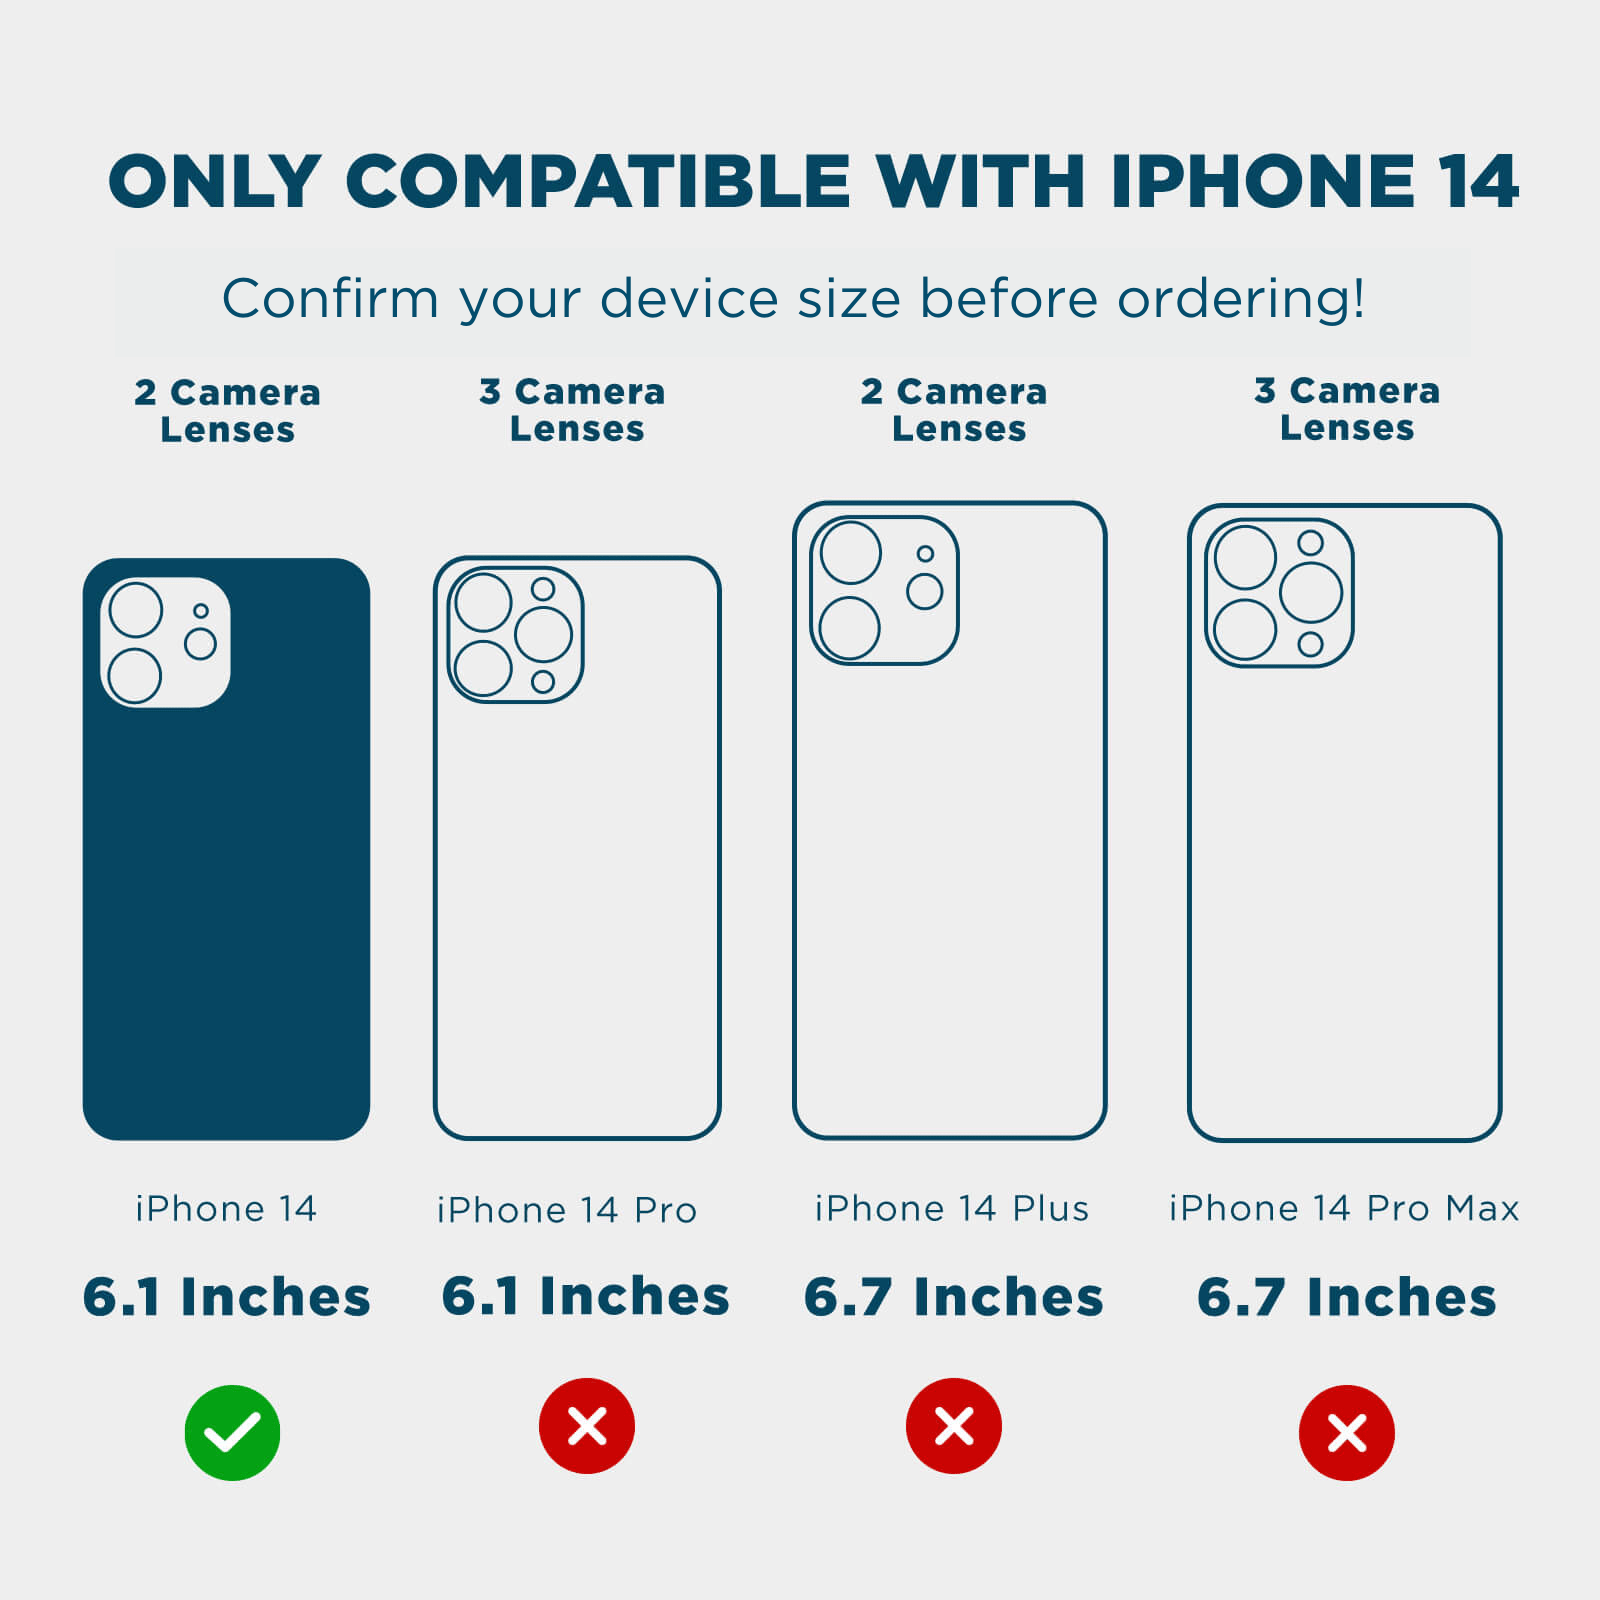 ONLY COMPATIBLE WITH IPHONE 14. CONFIRM YOUR DEVICE SIZE BEFORE ORDERING! 2 CAMERA LENSES, 6.1IN SCREEN